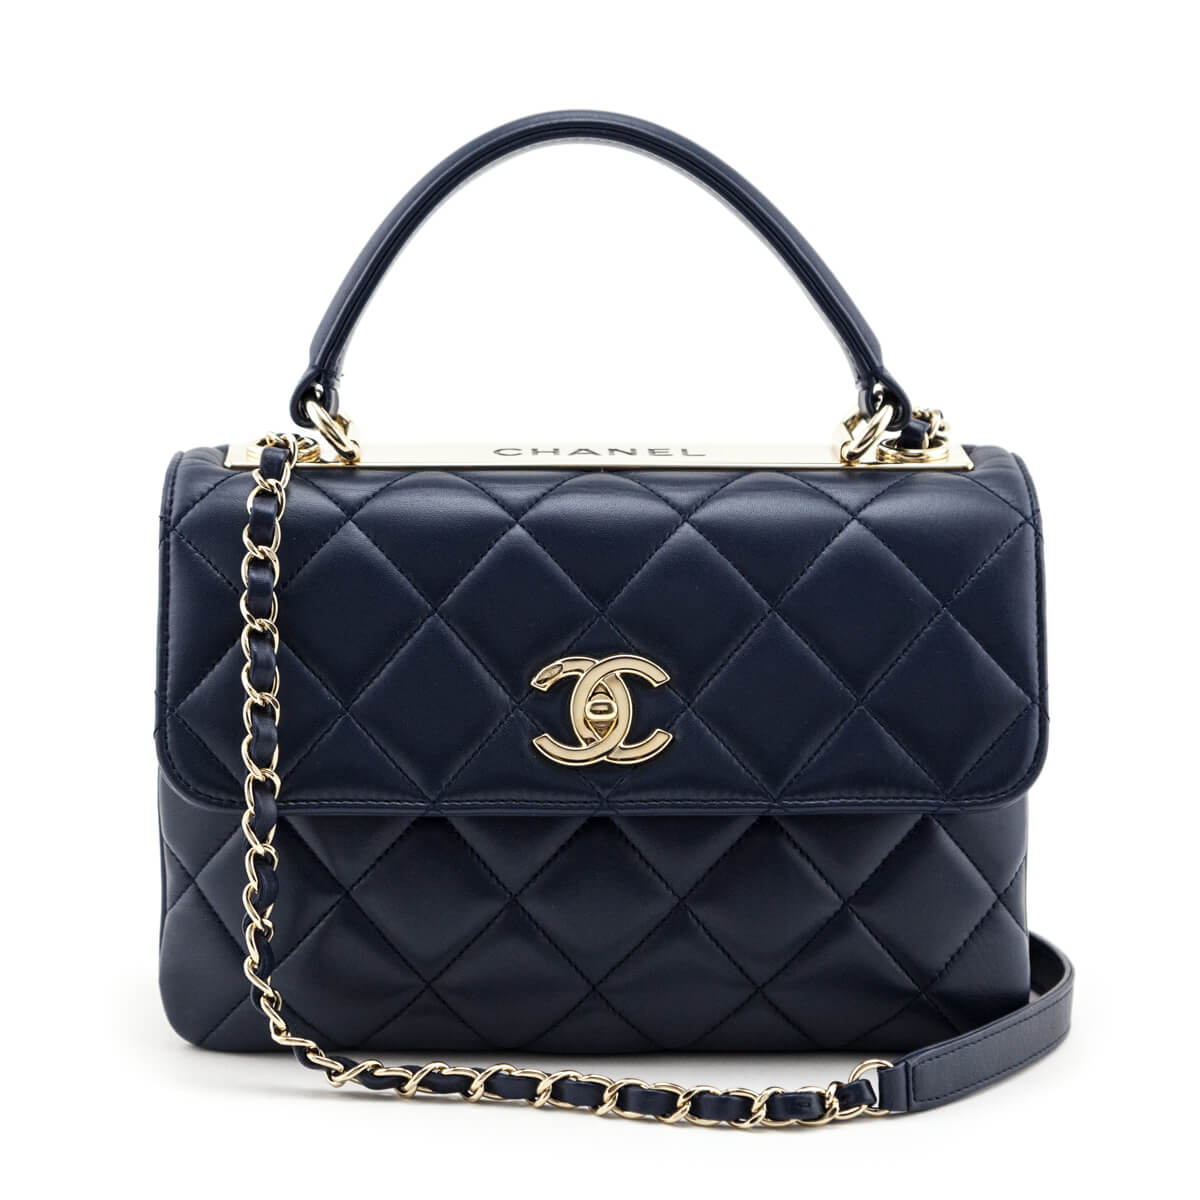 Chanel Navy Quilted Lambskin Small Trendy CC Top Handle Flap Bag - Love that Bag etc - Preowned Authentic Designer Handbags & Preloved Fashions